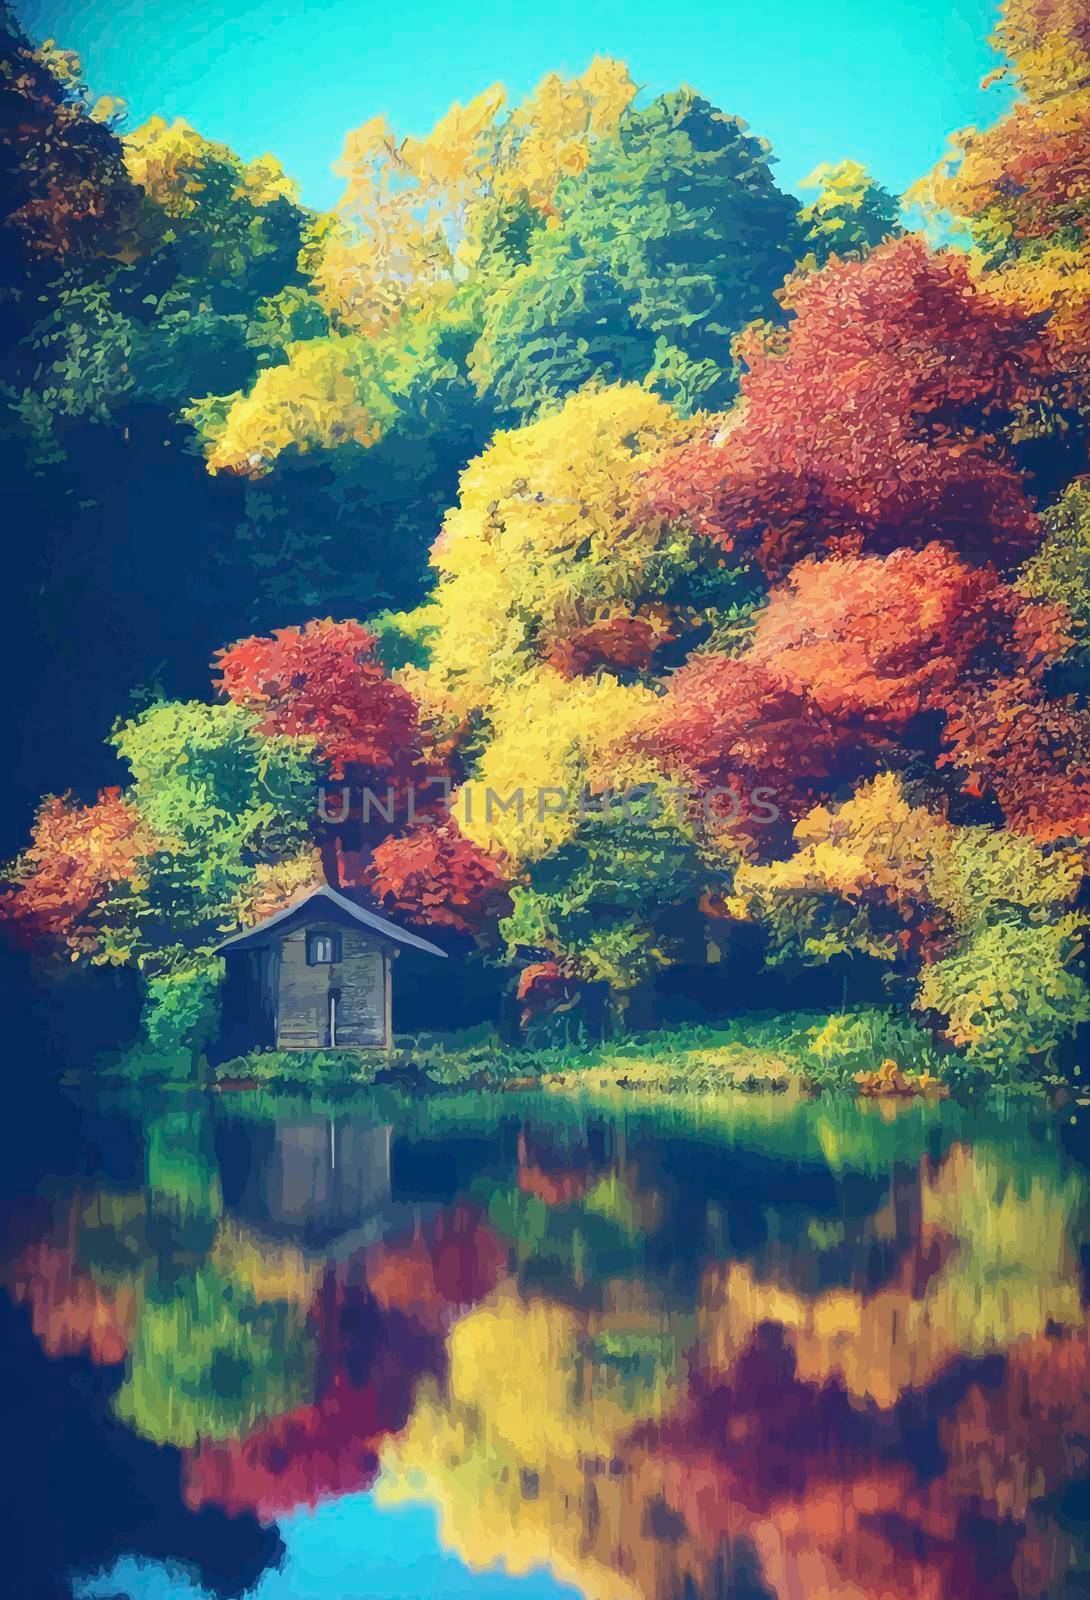 cabin in the woods by the lake, forest in autumn by JpRamos